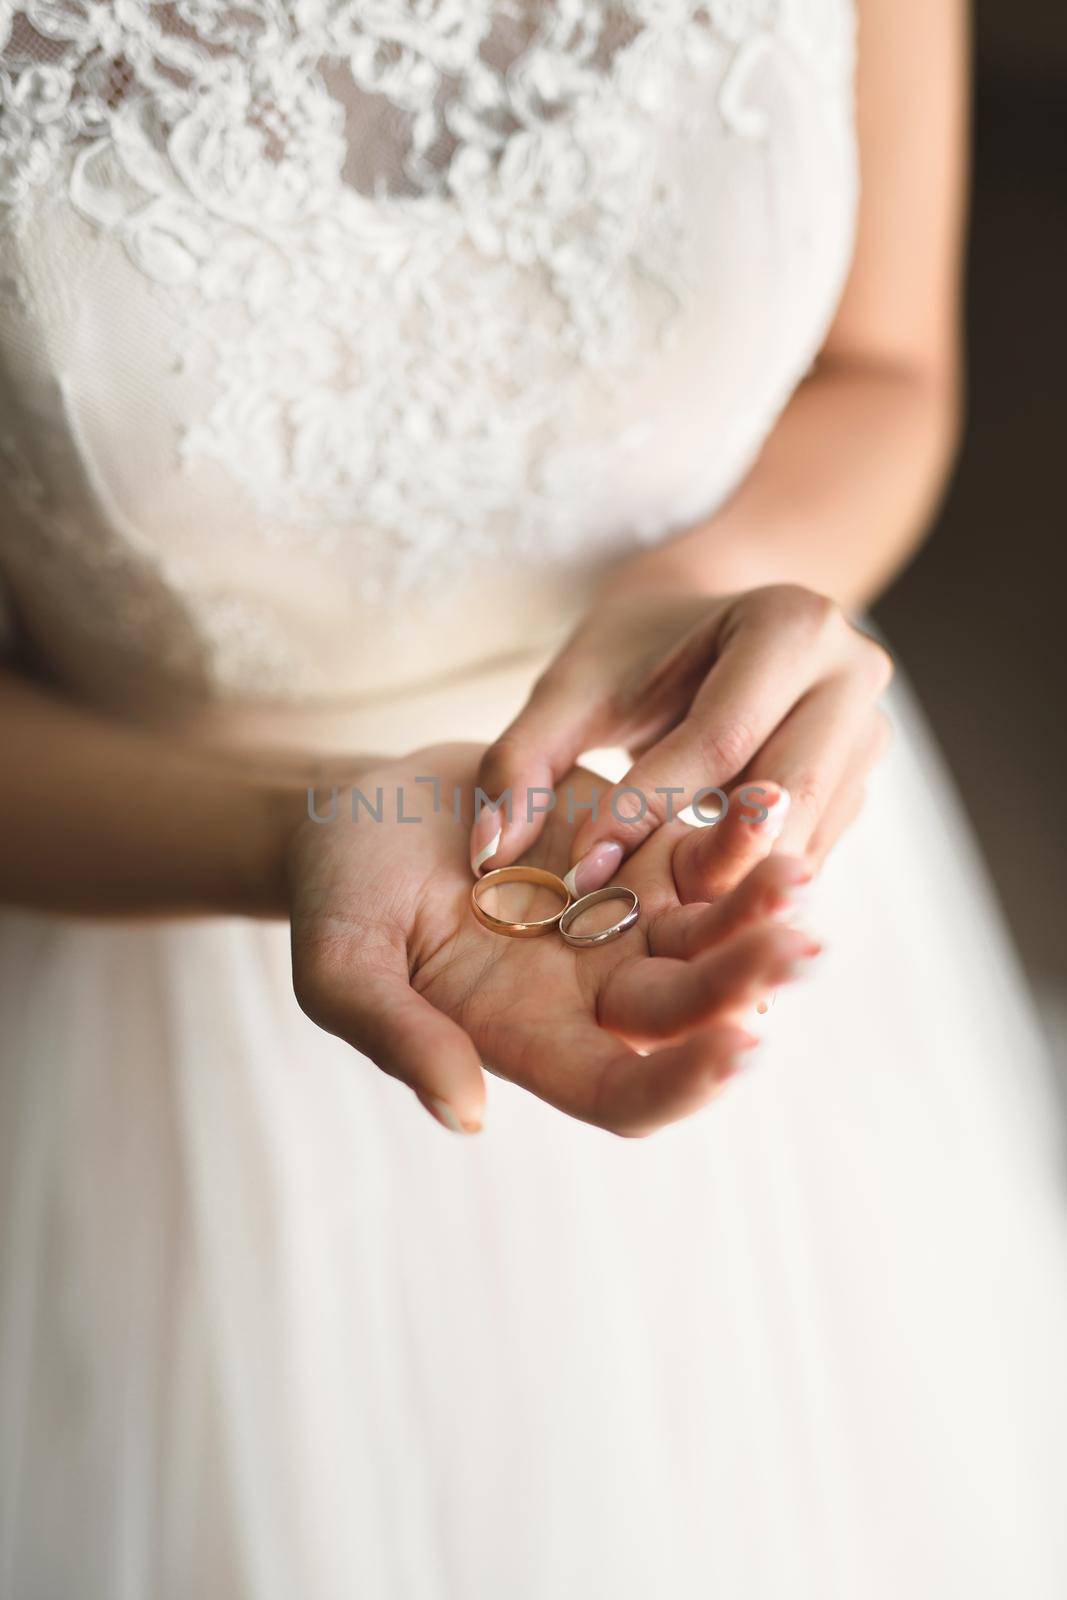 Bride in a white dress holds gold wedding rings in her hands. by StudioPeace